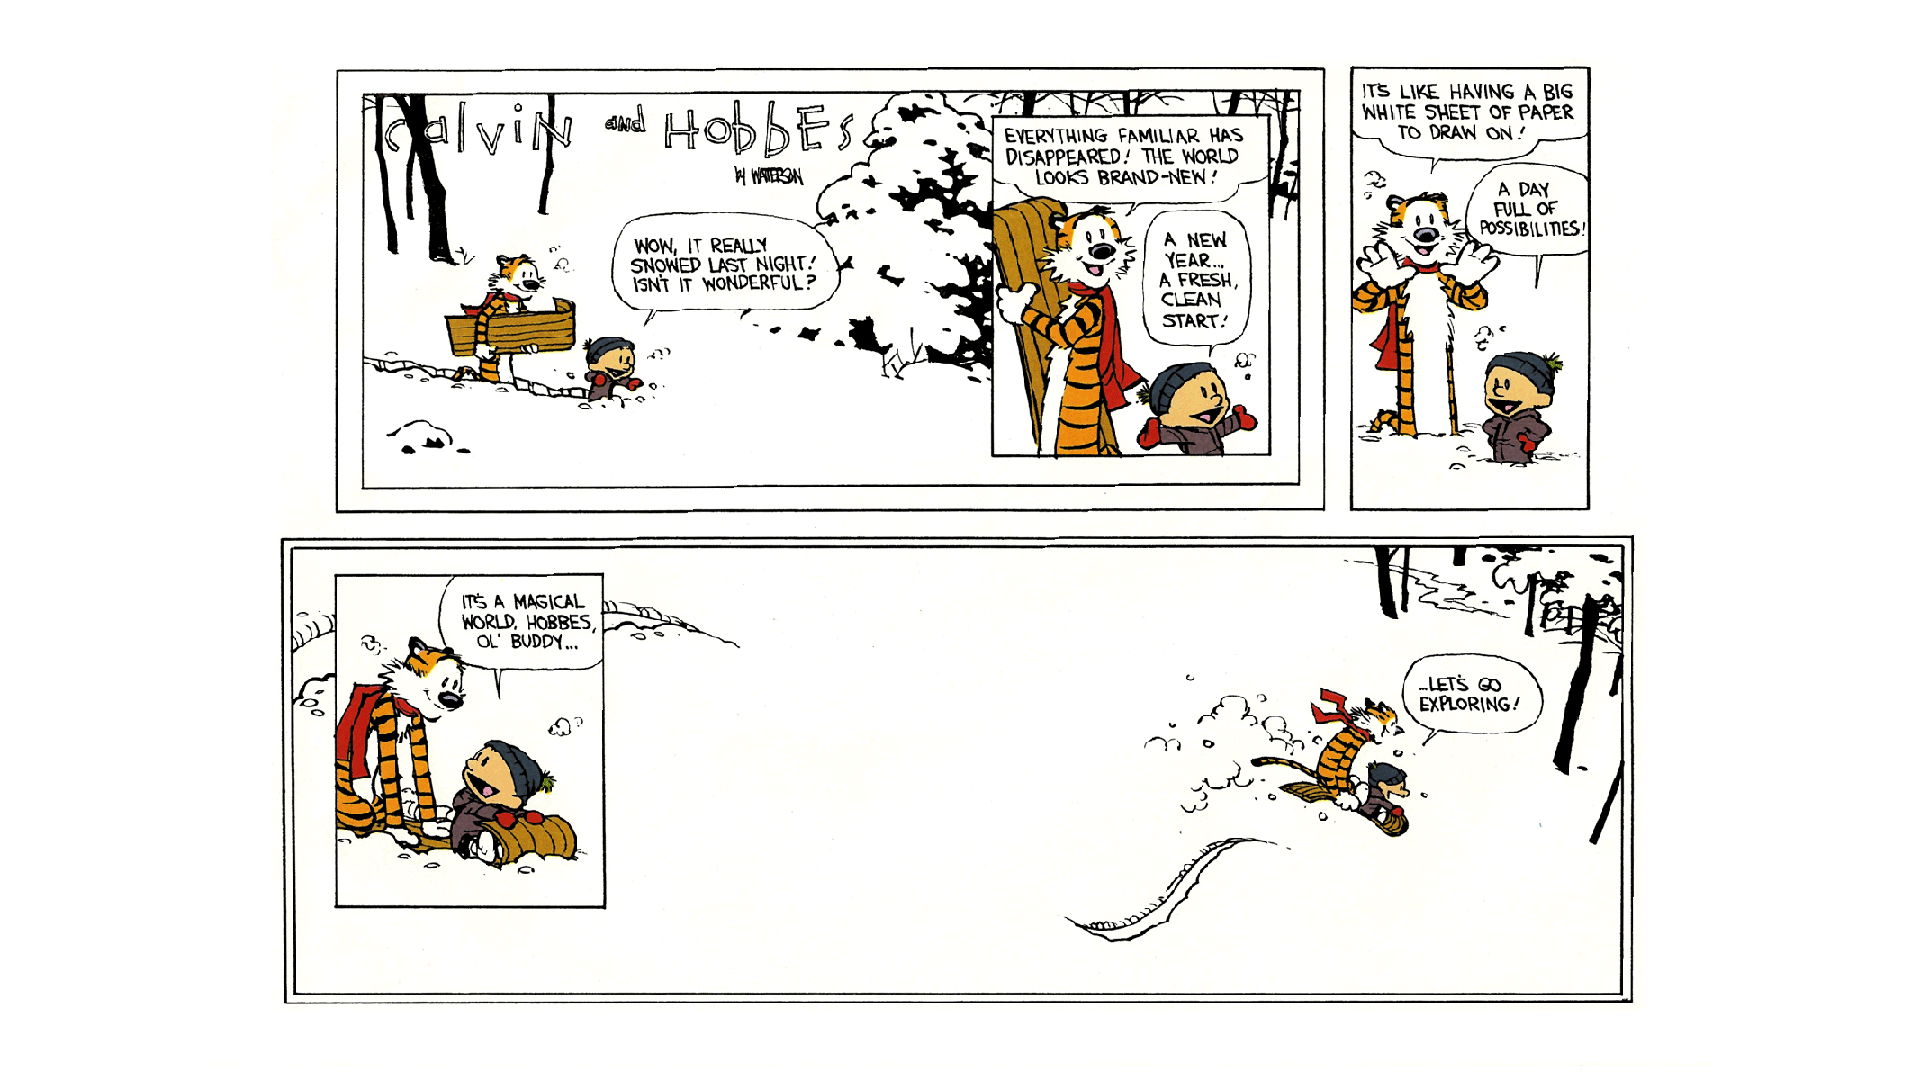 General 1920x1080 Calvin and Hobbes Bill Watterson comic art white background